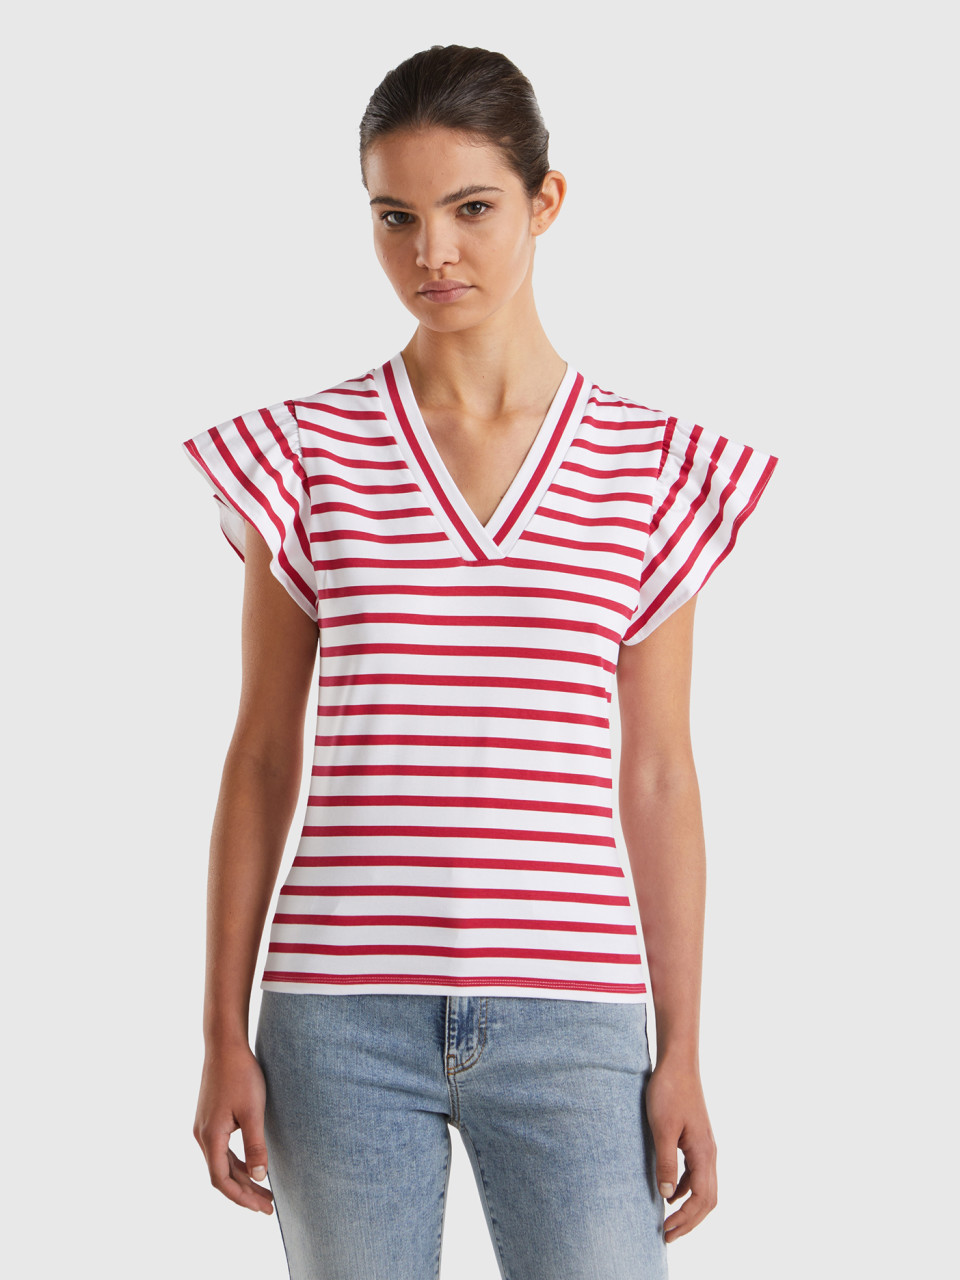 Benetton, T-shirt With Cap Sleeves, Red, Women